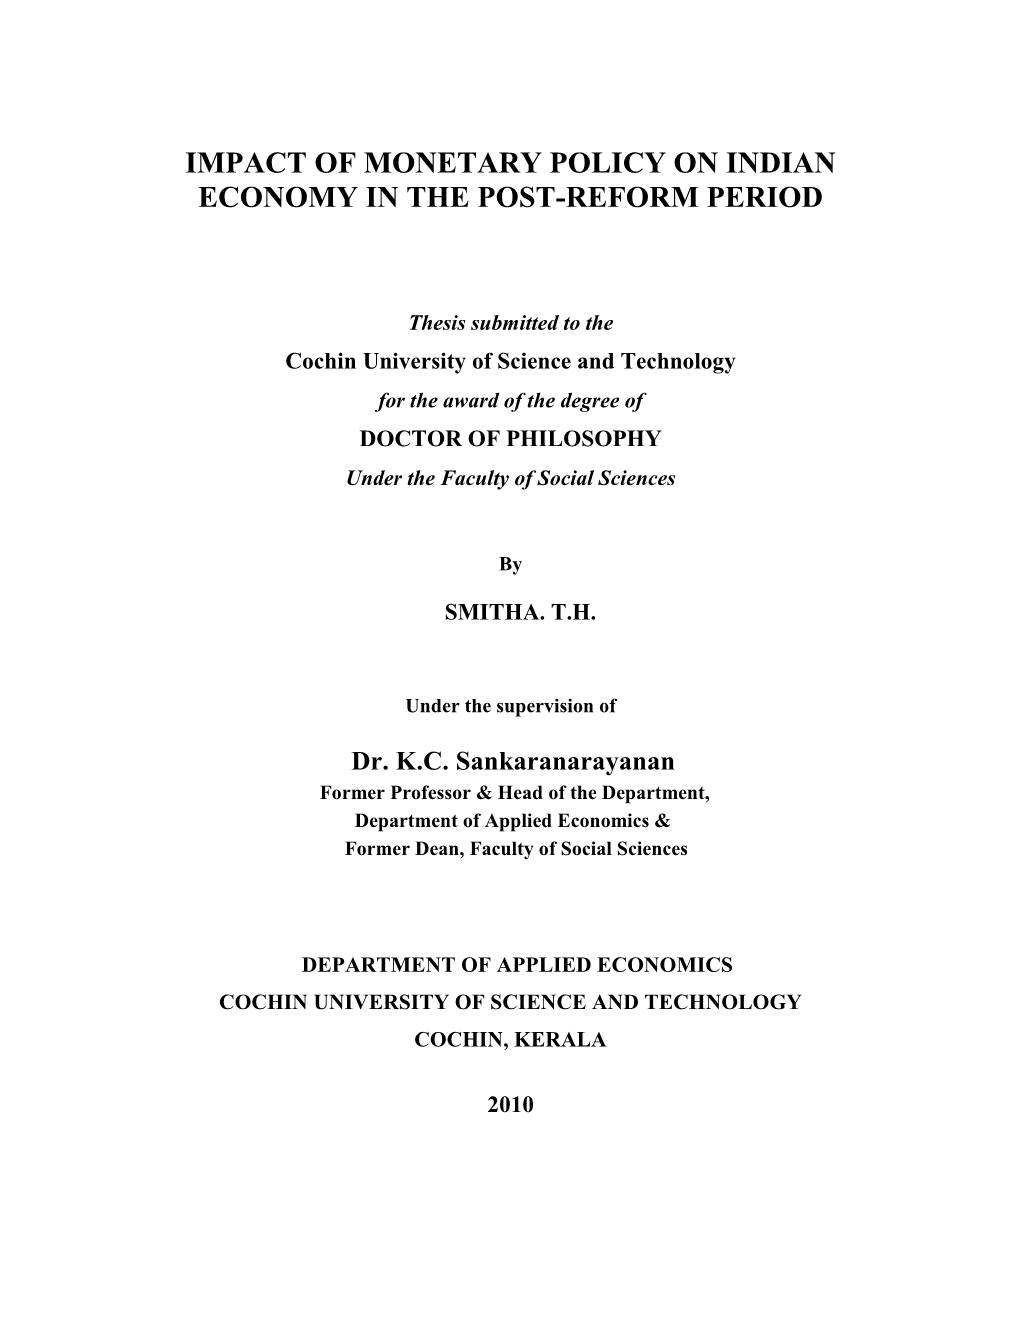 Impact of Monetary Policy on Indian Economy in the Post-Reform Period